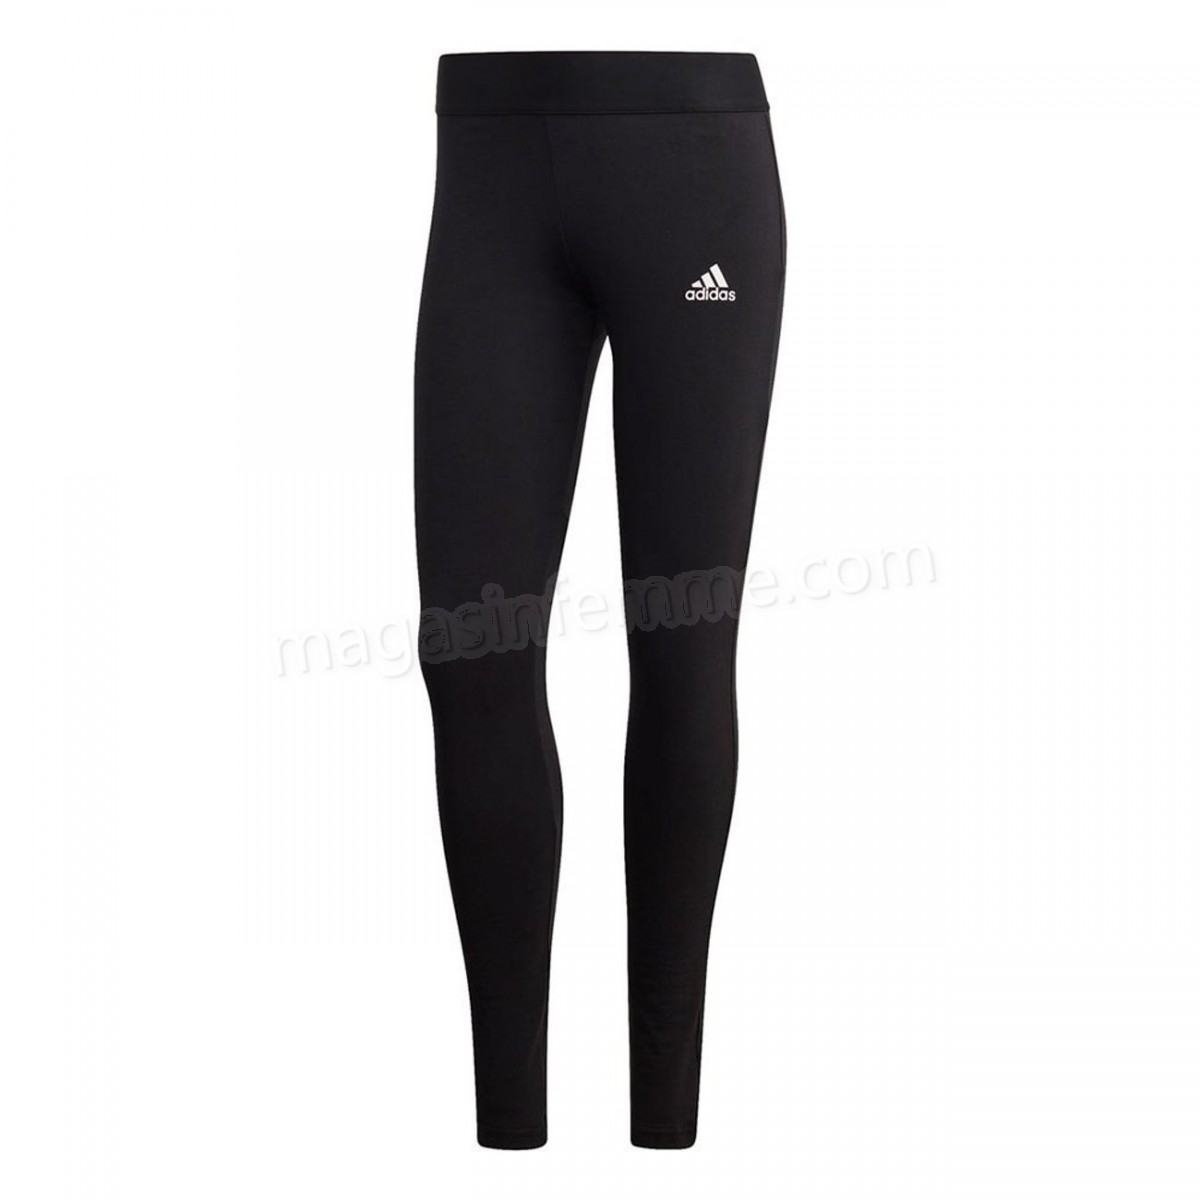 Adidas-Fitness femme ADIDAS Collant femme adidas Must Haves 3-Stripes en solde - -0